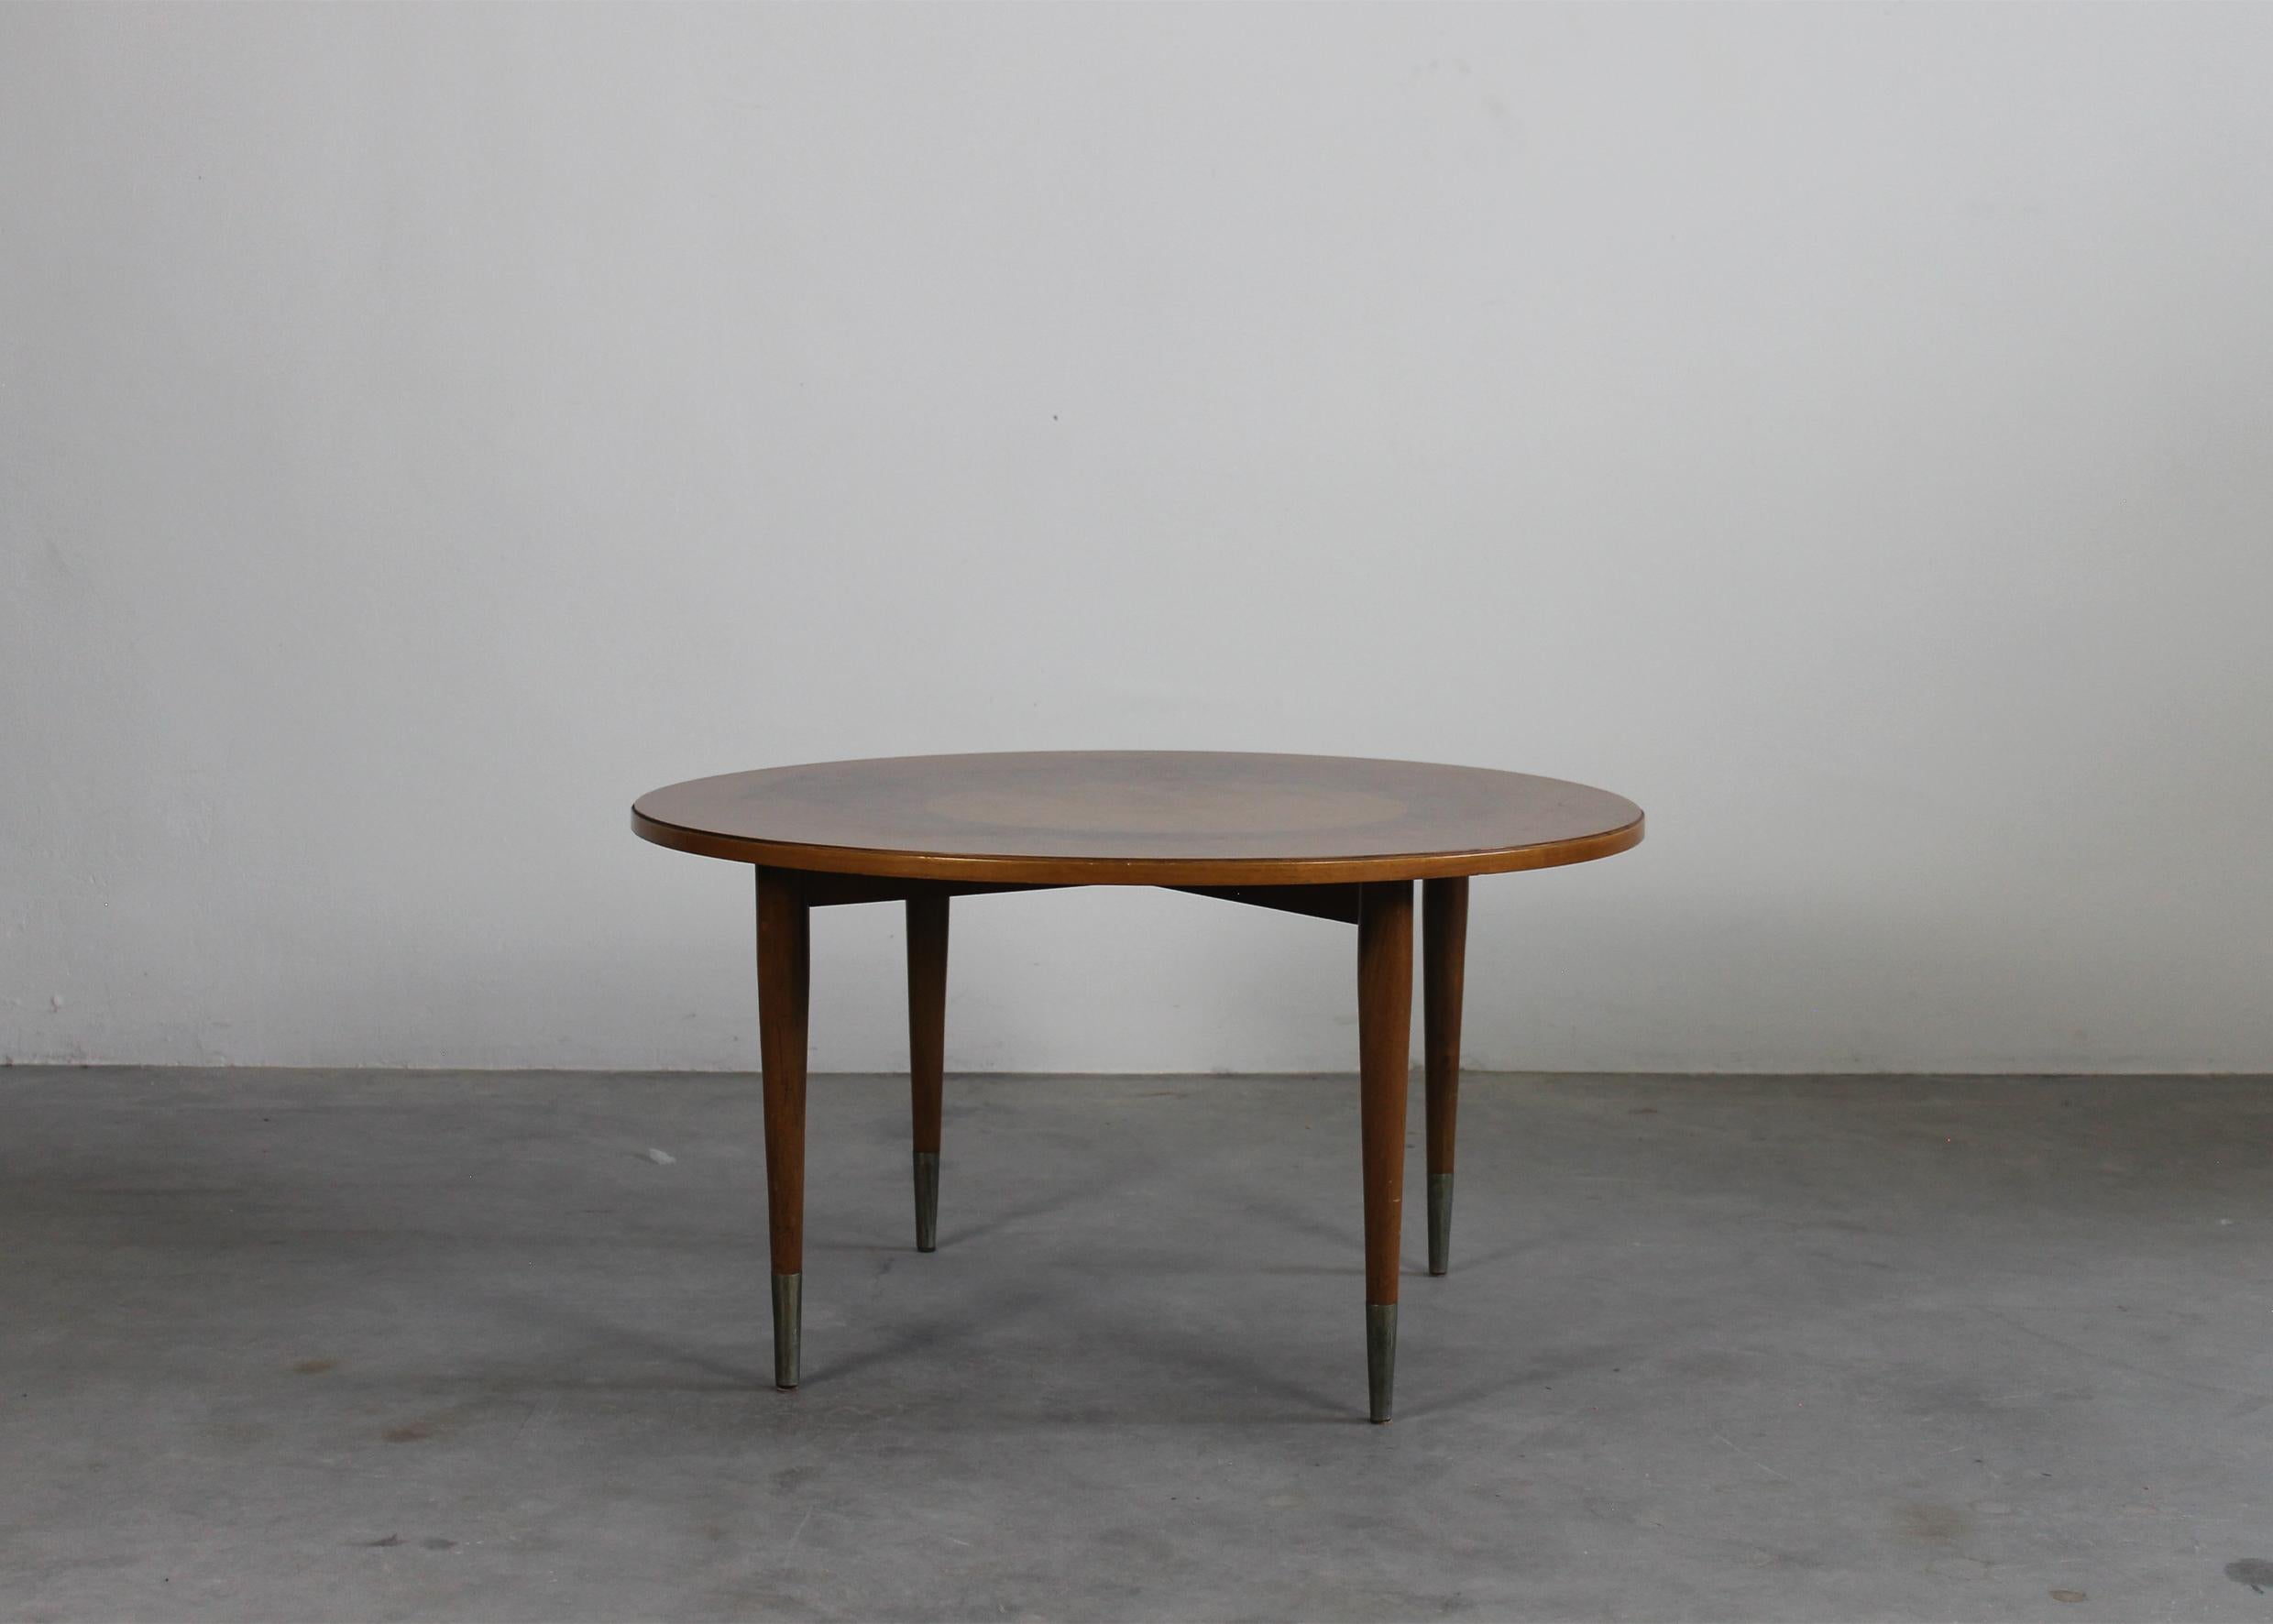 Round coffee table realized in walnut wood with metal details, the tabletop presents an elegant circular decorative motif. 

Attribuited to Gio Ponti, Italian manufacturer from the 1950s 

Gio Ponti was an icon of the modernist movement: the Italian